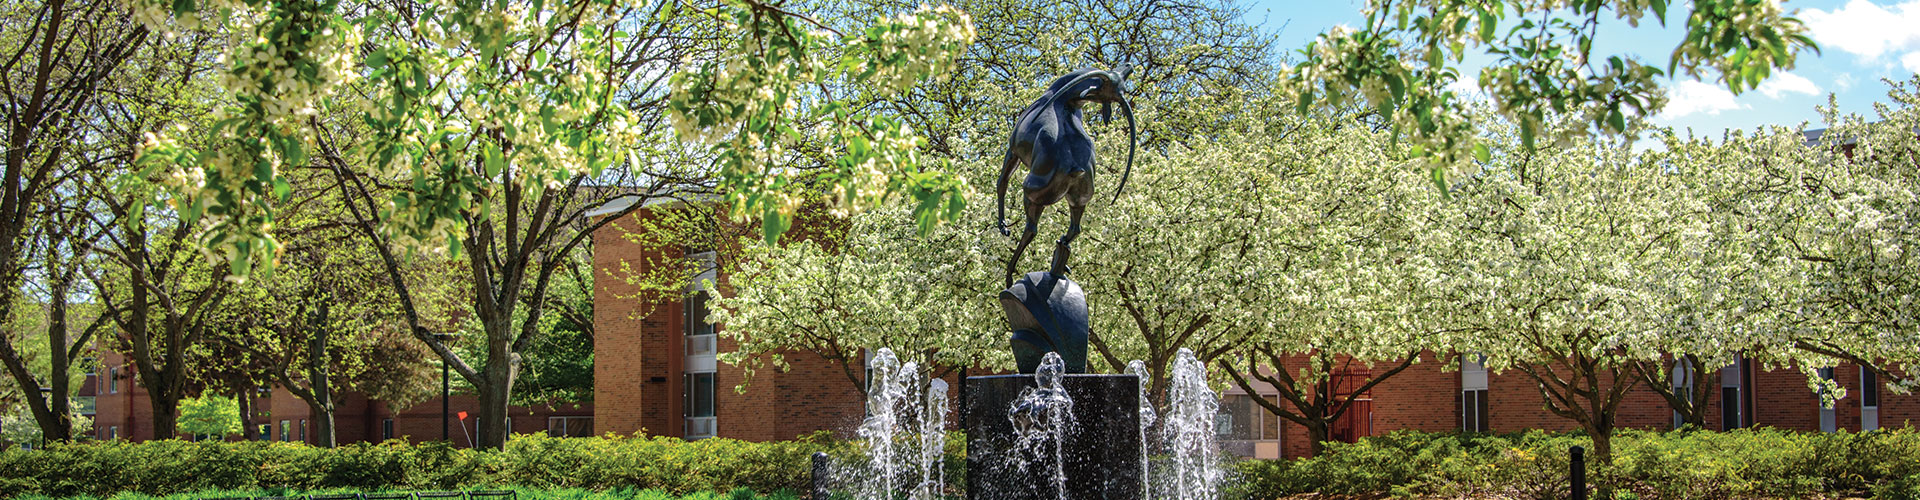 Campus courtyard, fountain and statue